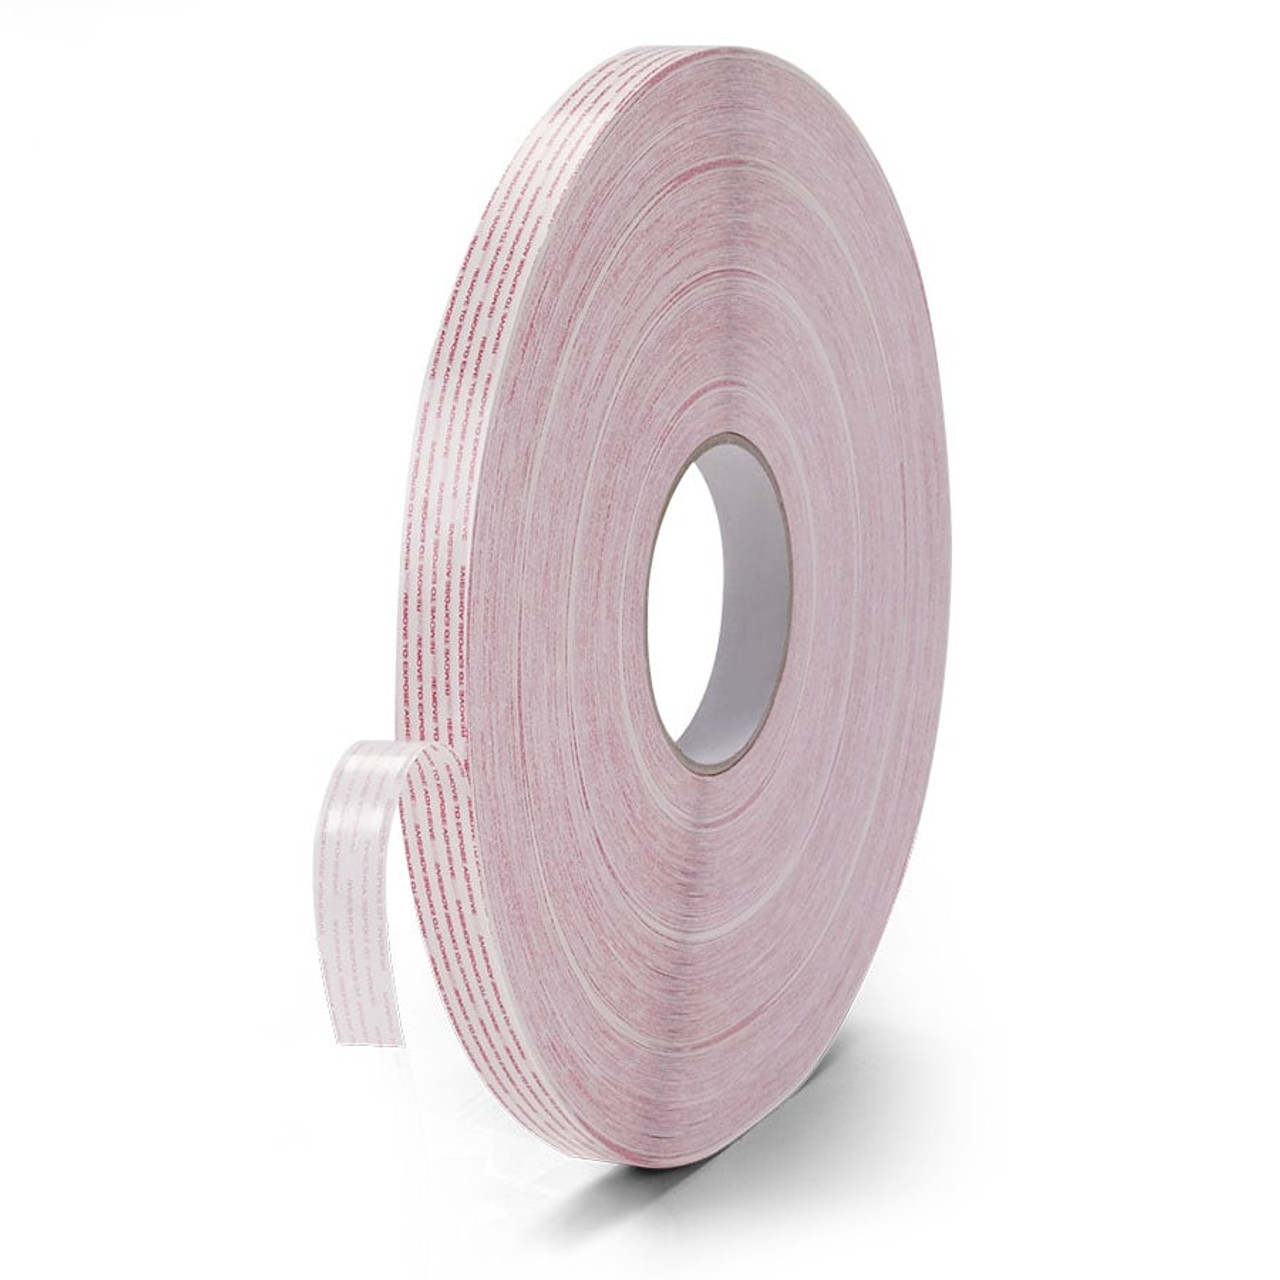 Roll-Fix Tape Measure - Automatic Roll-up, 60/150 cm/5 ft, Pink, Free  Shipping